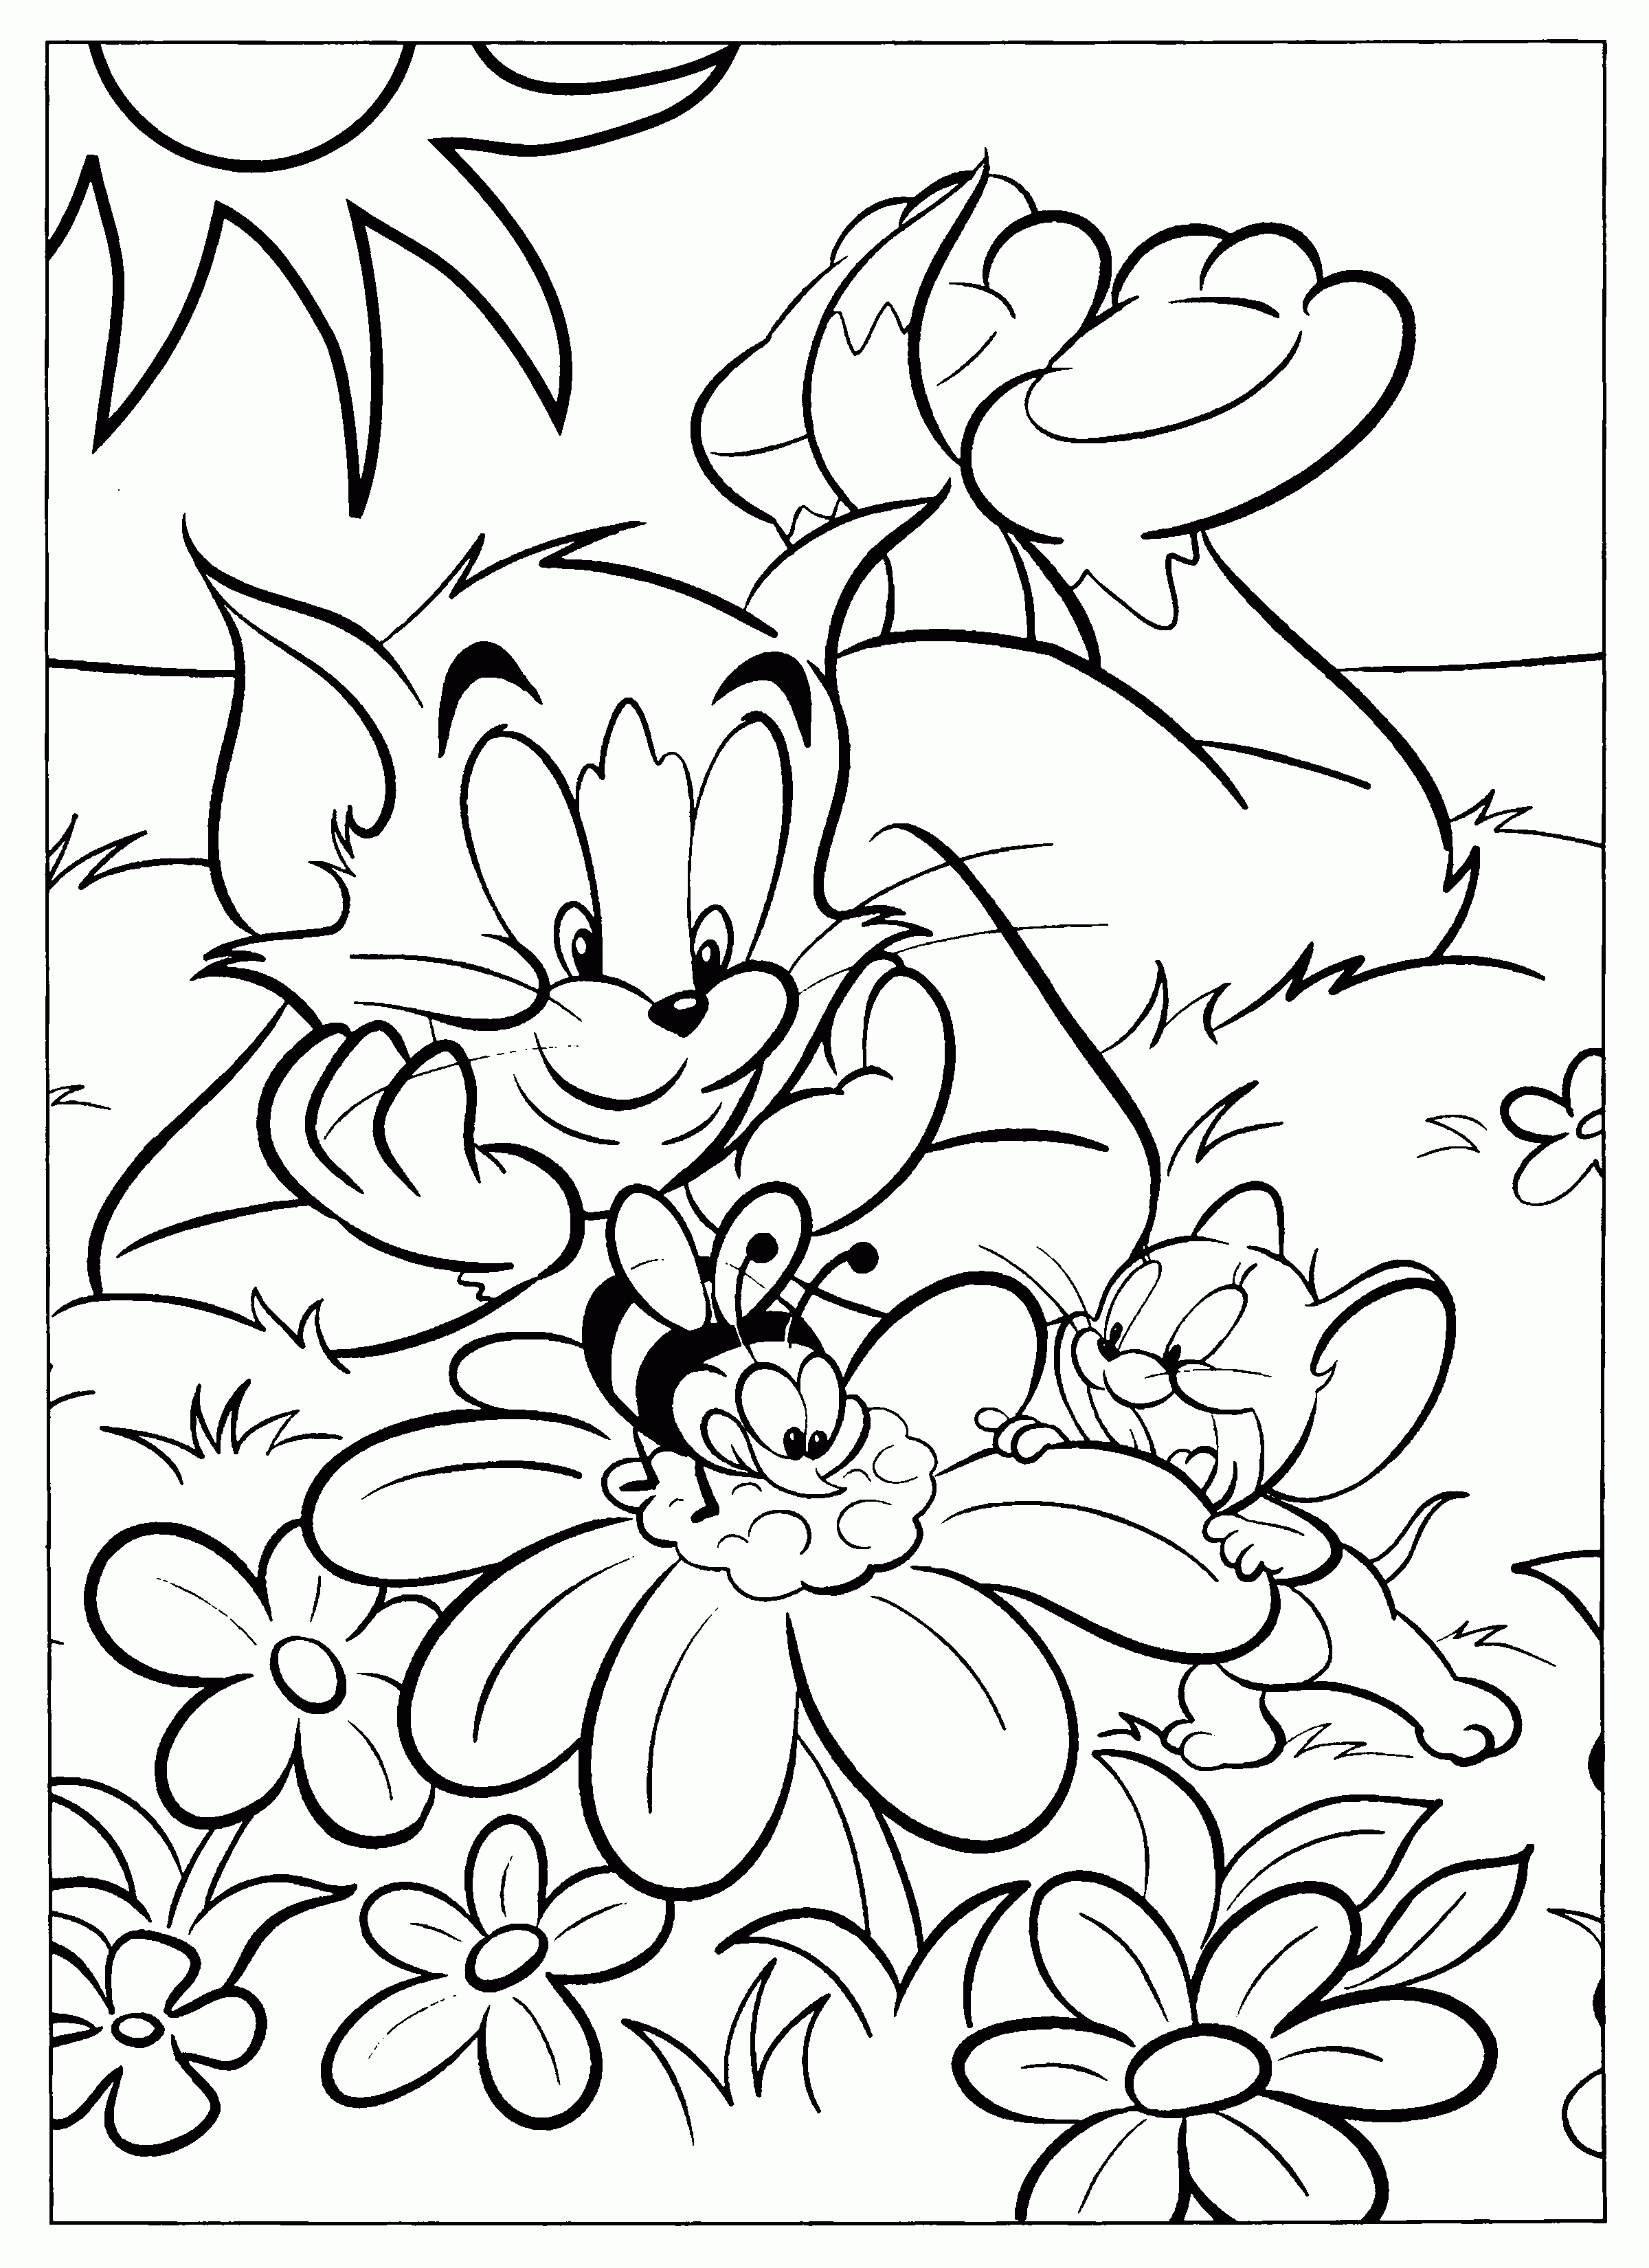 Tom And Jerry Coloring Page - Google Search | Possible Wall Mural - Free Printable Tom And Jerry Coloring Pages